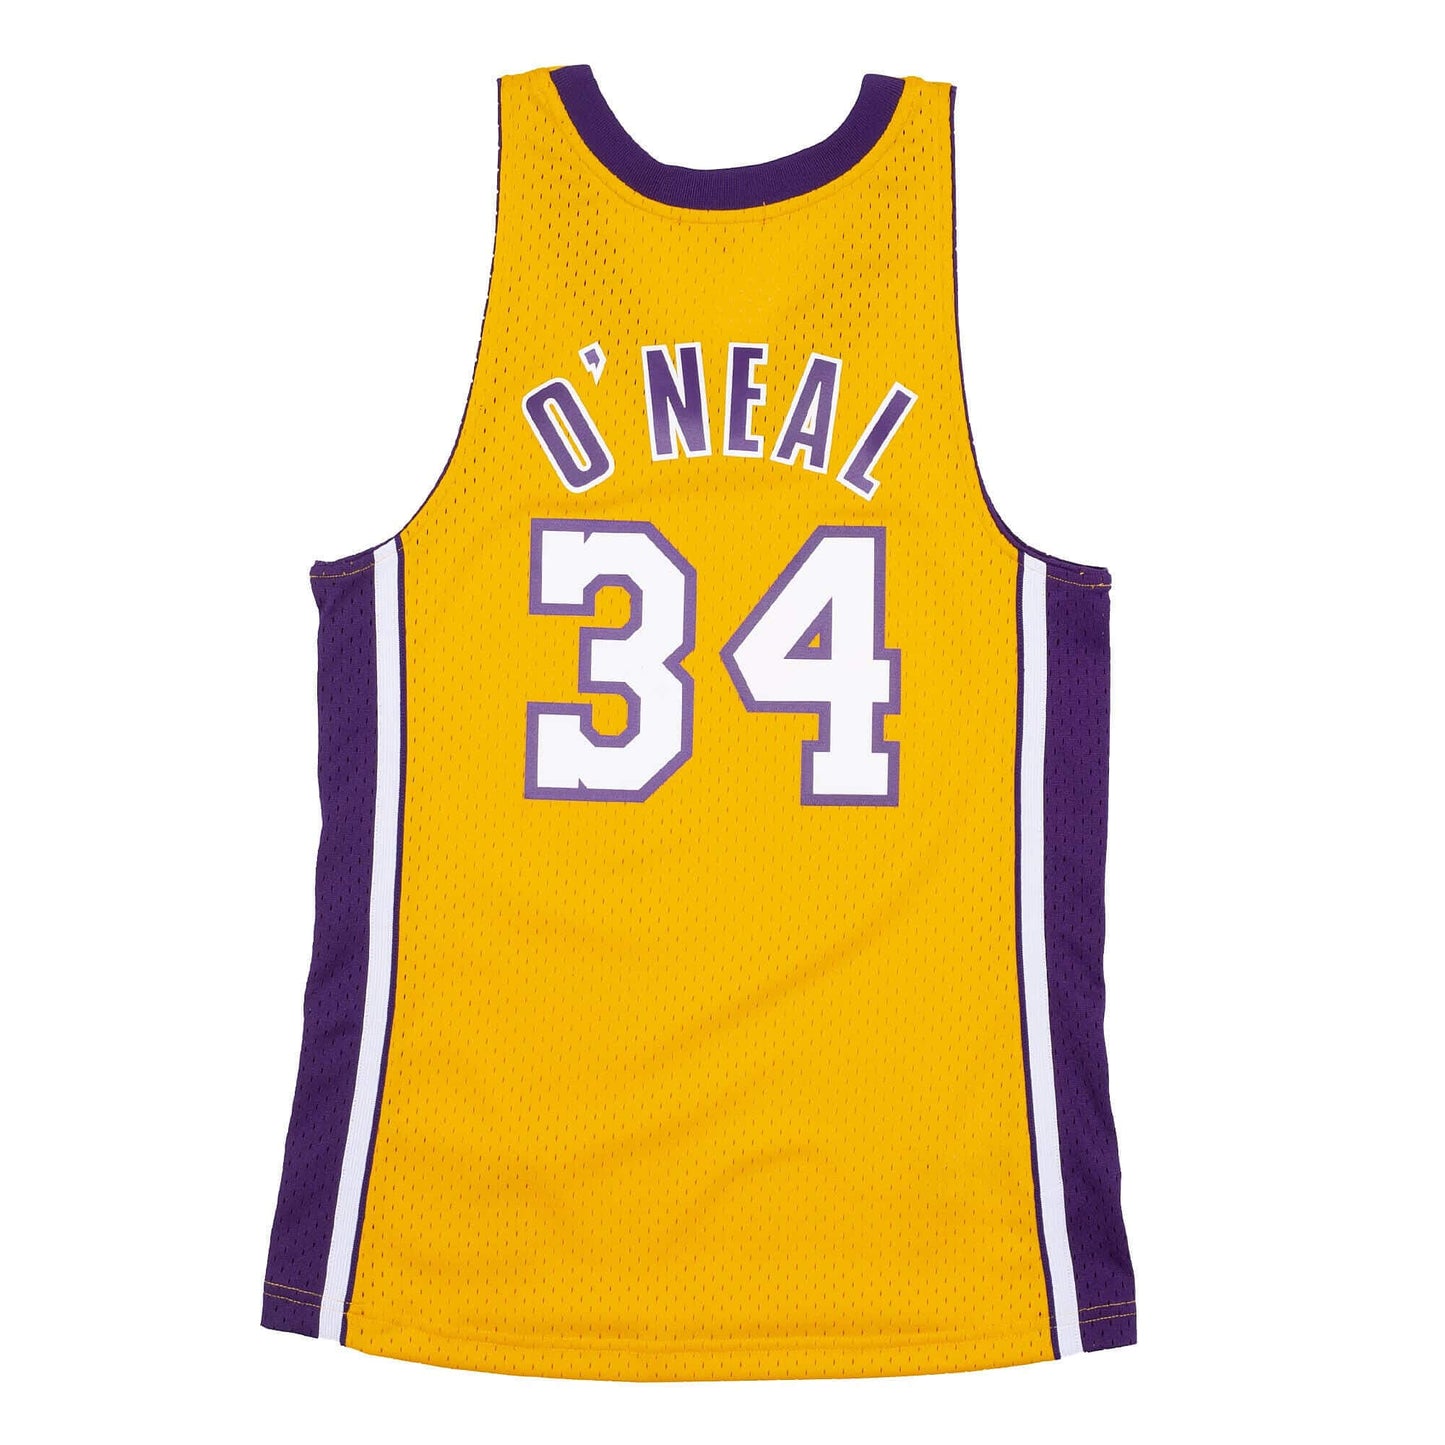 Mitchell & Ness NBA Womens Swingman Jersey LOS ANGELES LAKERS SHAQUILLE O'NEAL LIGHT GOLD